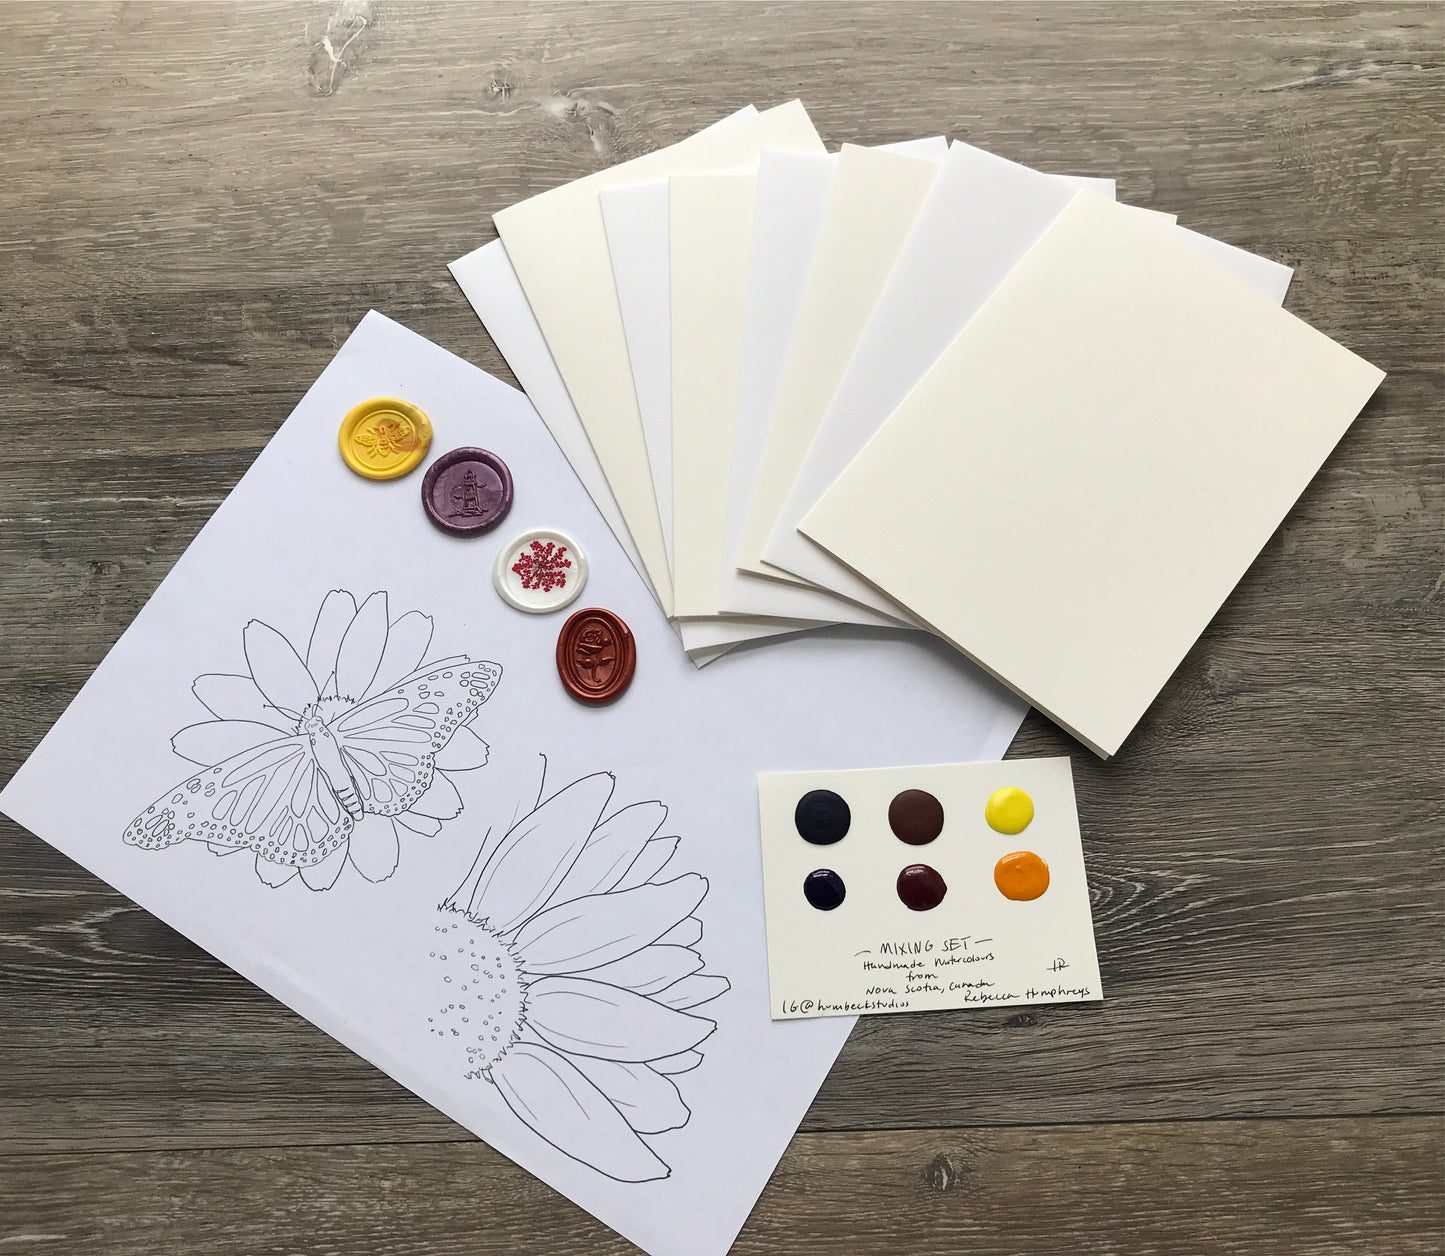 Watercolour Greeting Card DIY Kit, Sunflowers and Butterflies